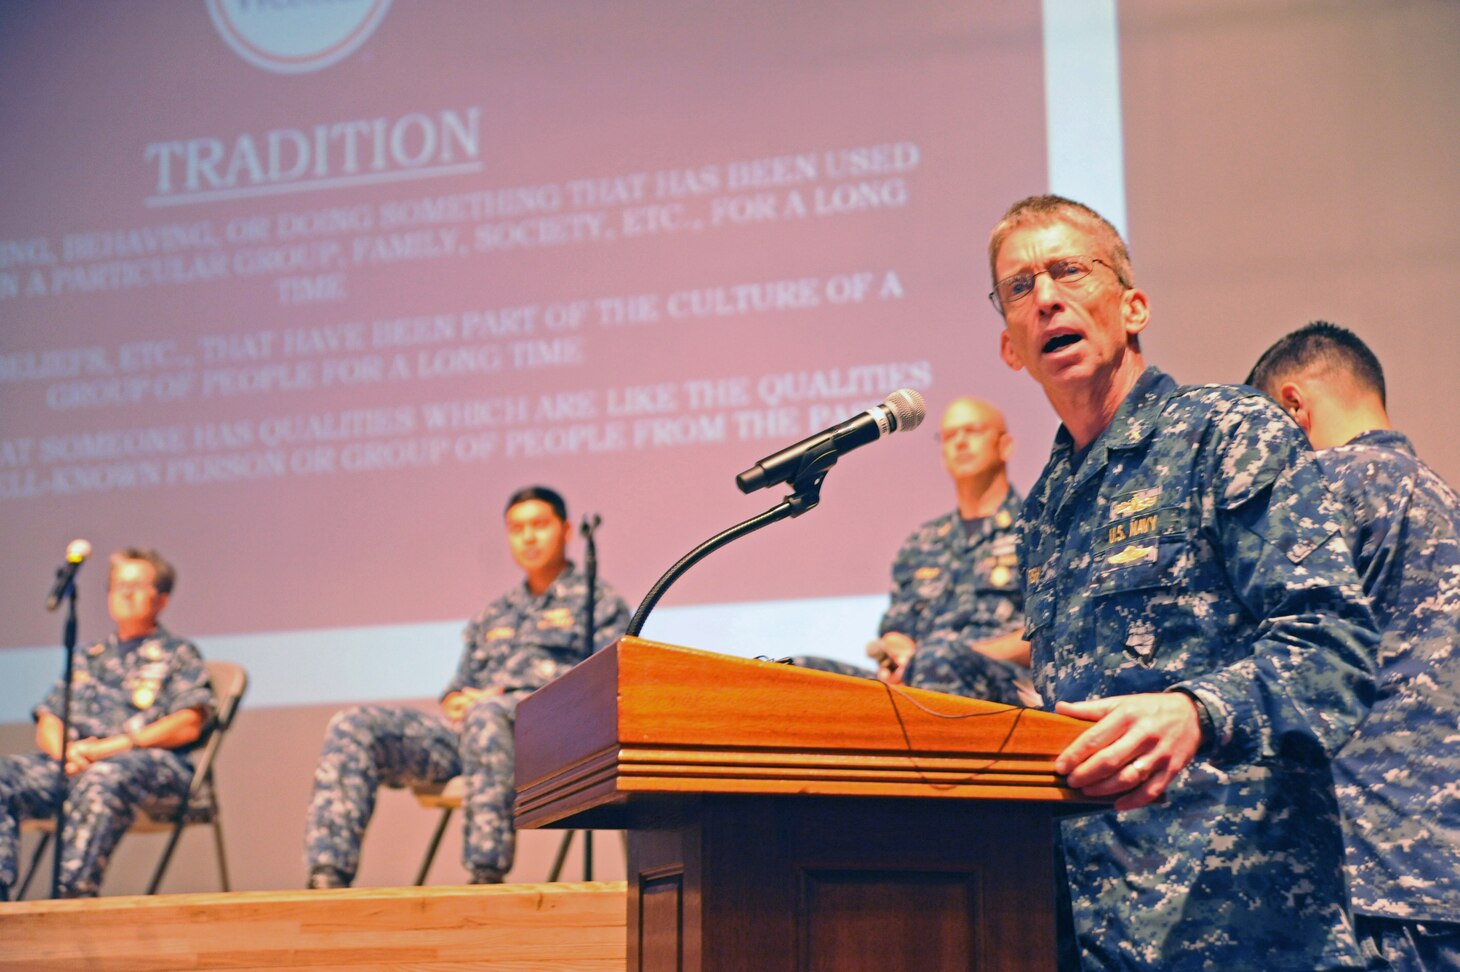 YOKOSUKA, Japan (July 21, 2016) U.S. 7th Fleet Chaplain Capt. Cameron Fish monitors a discussion panel on tradition at 7th Fleet's first Leadership, Equality, and Diversity (LEAD) symposium on Yokosuka Naval Base. The LEAD symposium focused on cultivating leadership and understanding of equality and diversity issues in the Navy. (U.S. Navy photo by Mass Communication Specialist 2nd Class Indra Bosko/Released)